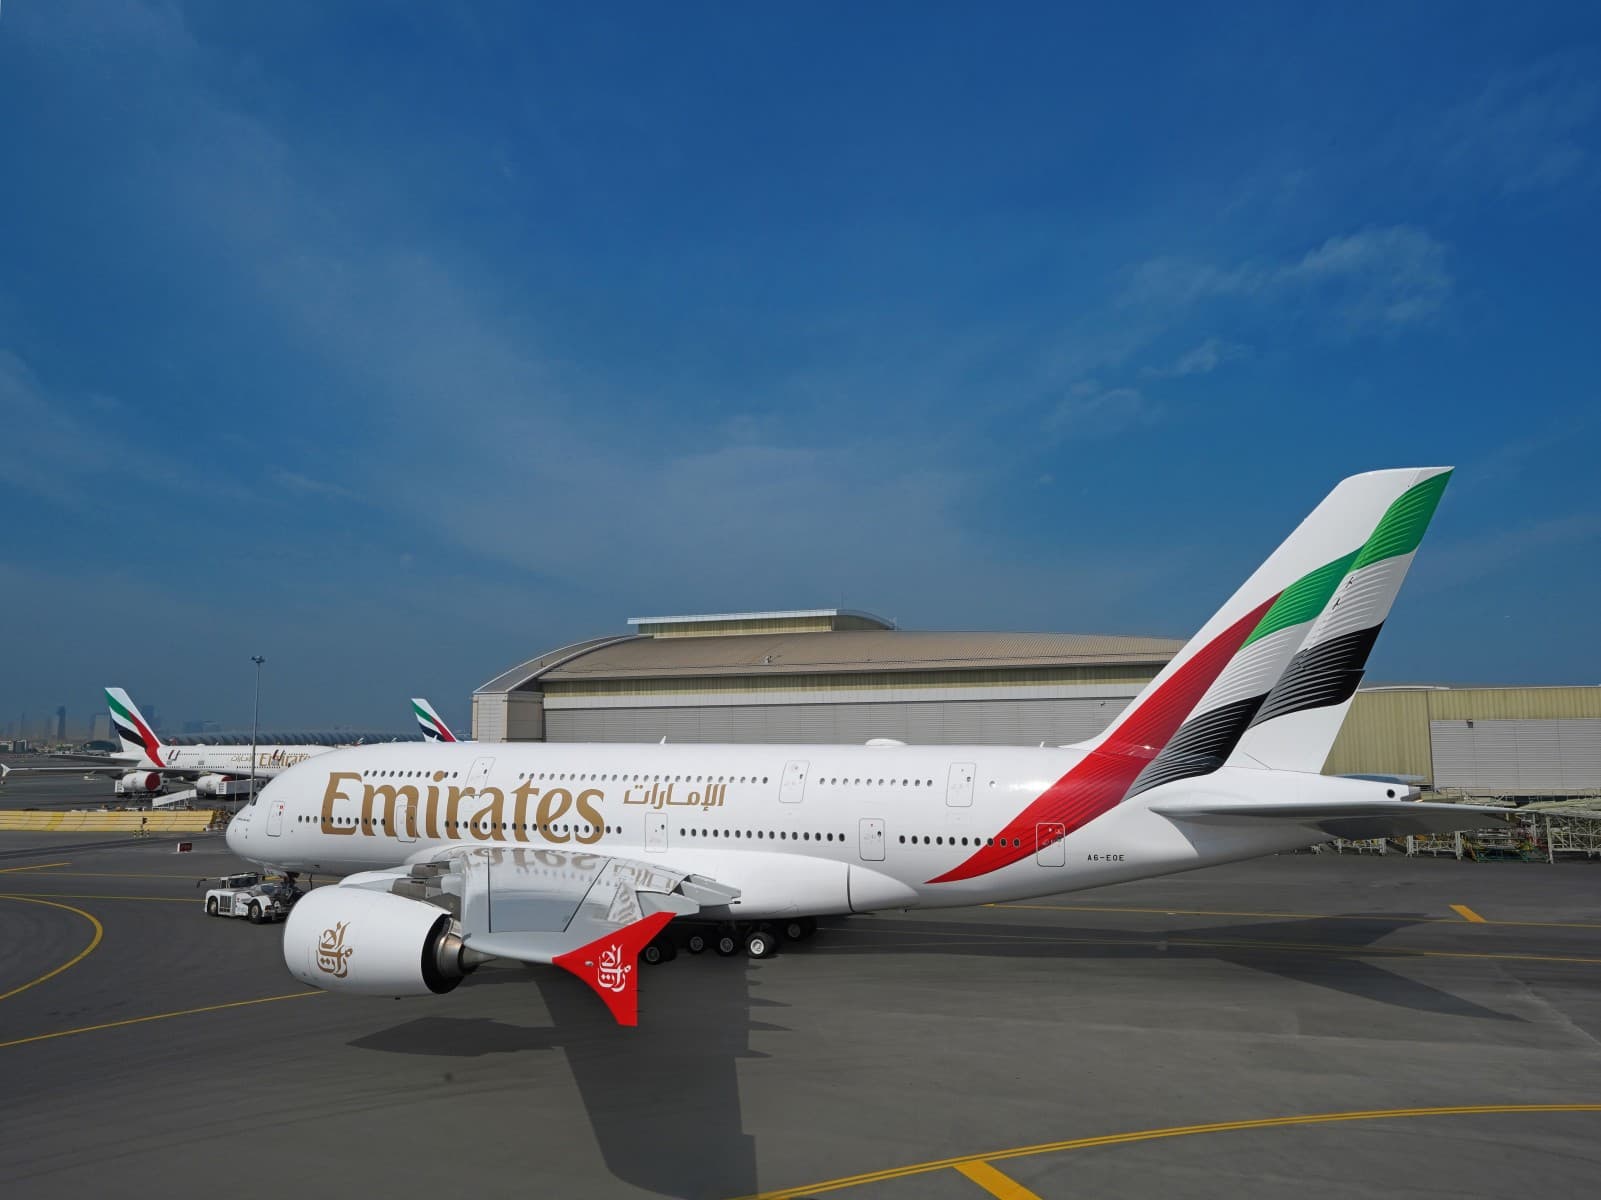 Dubai-based airline Emirates unveiled its redesigned aircraft